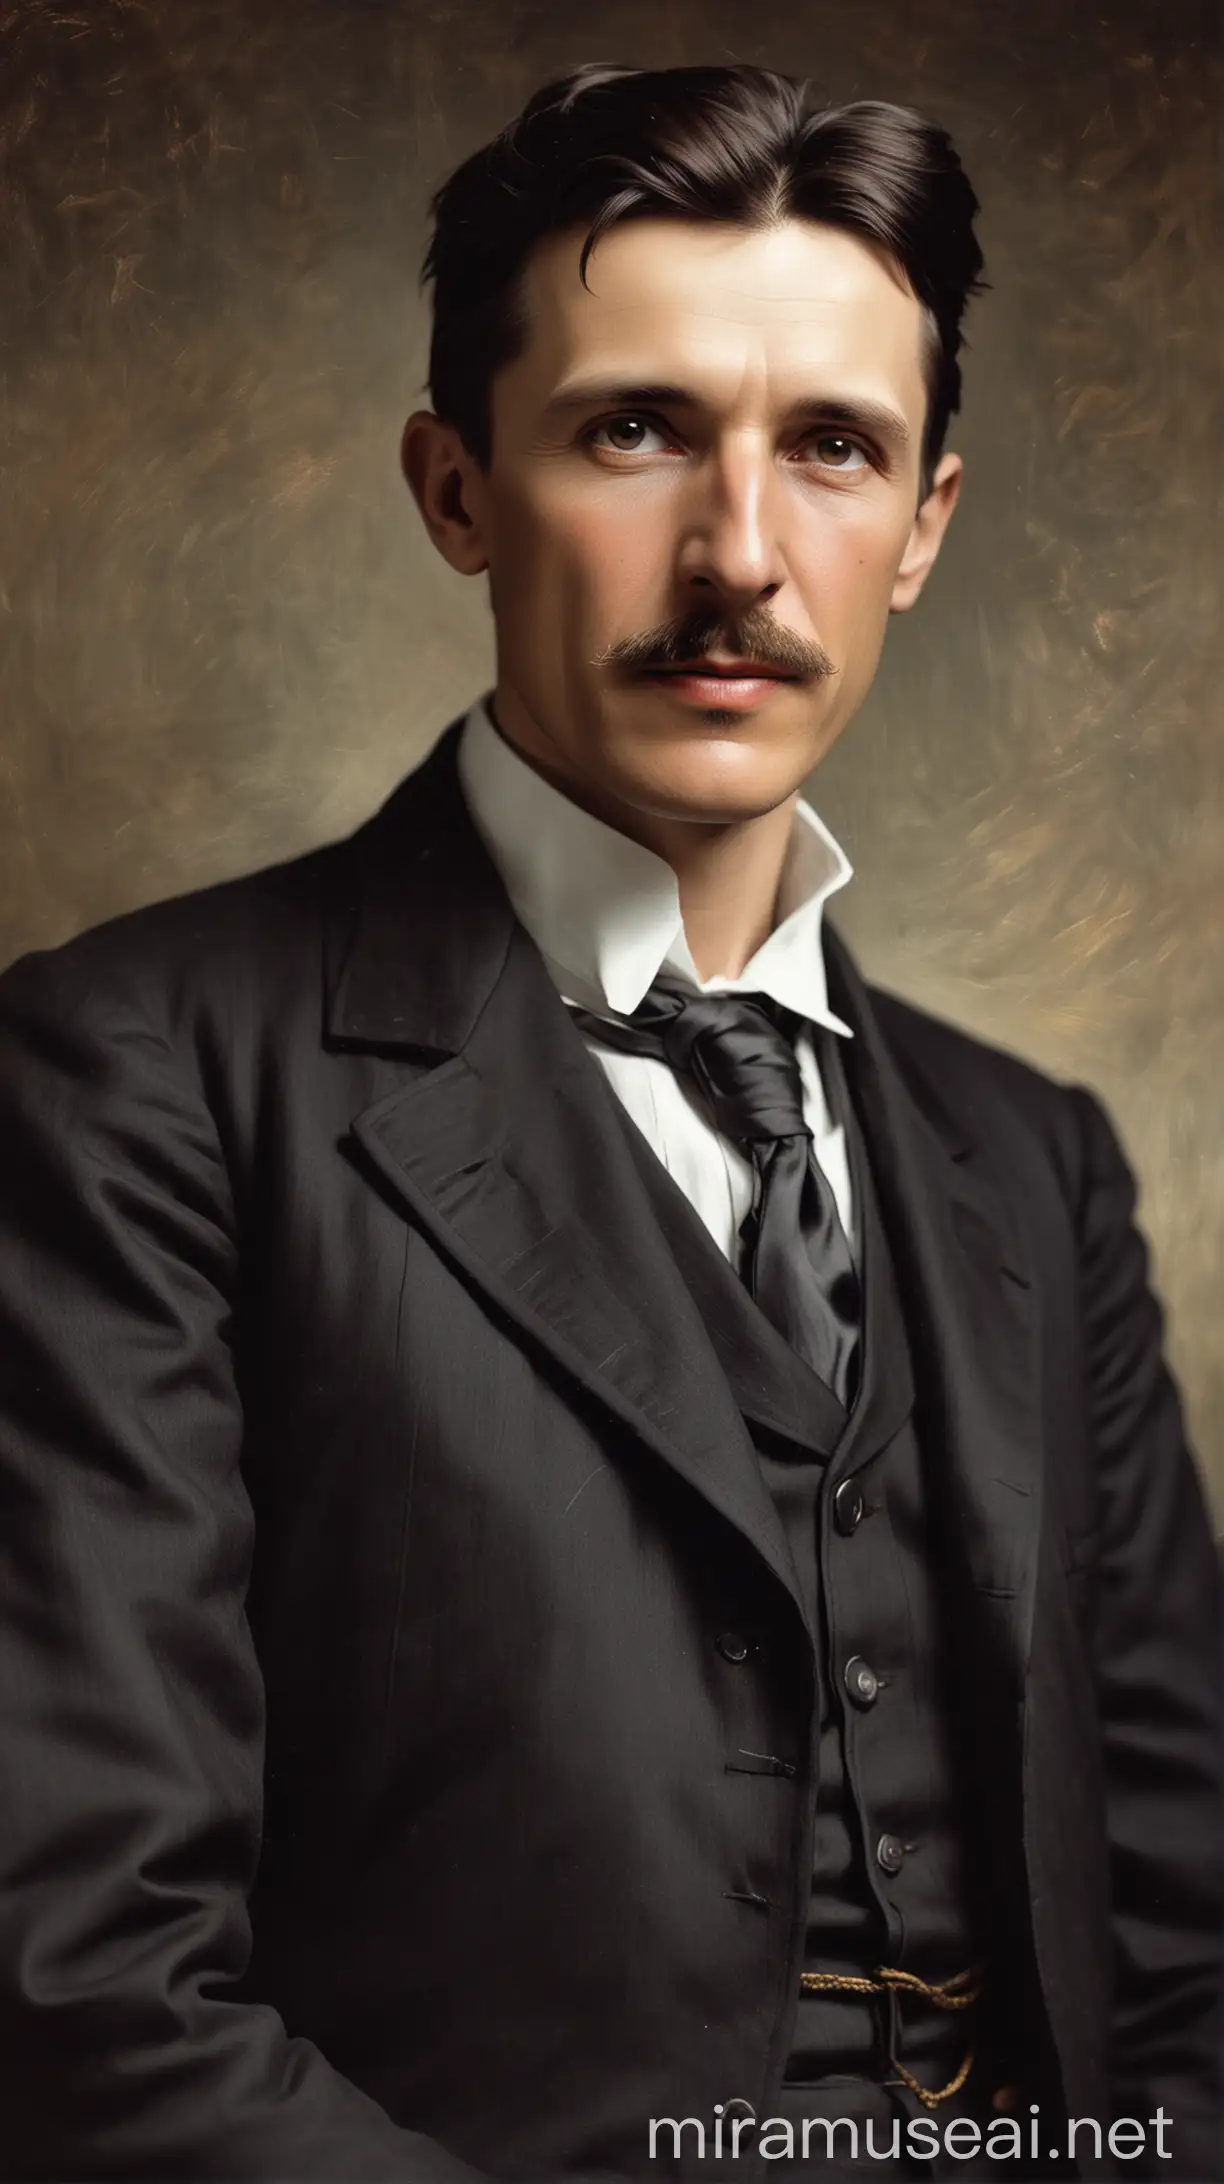 Portrait of Nikola Tesla with Electrical Inventions and Laboratory Equipment